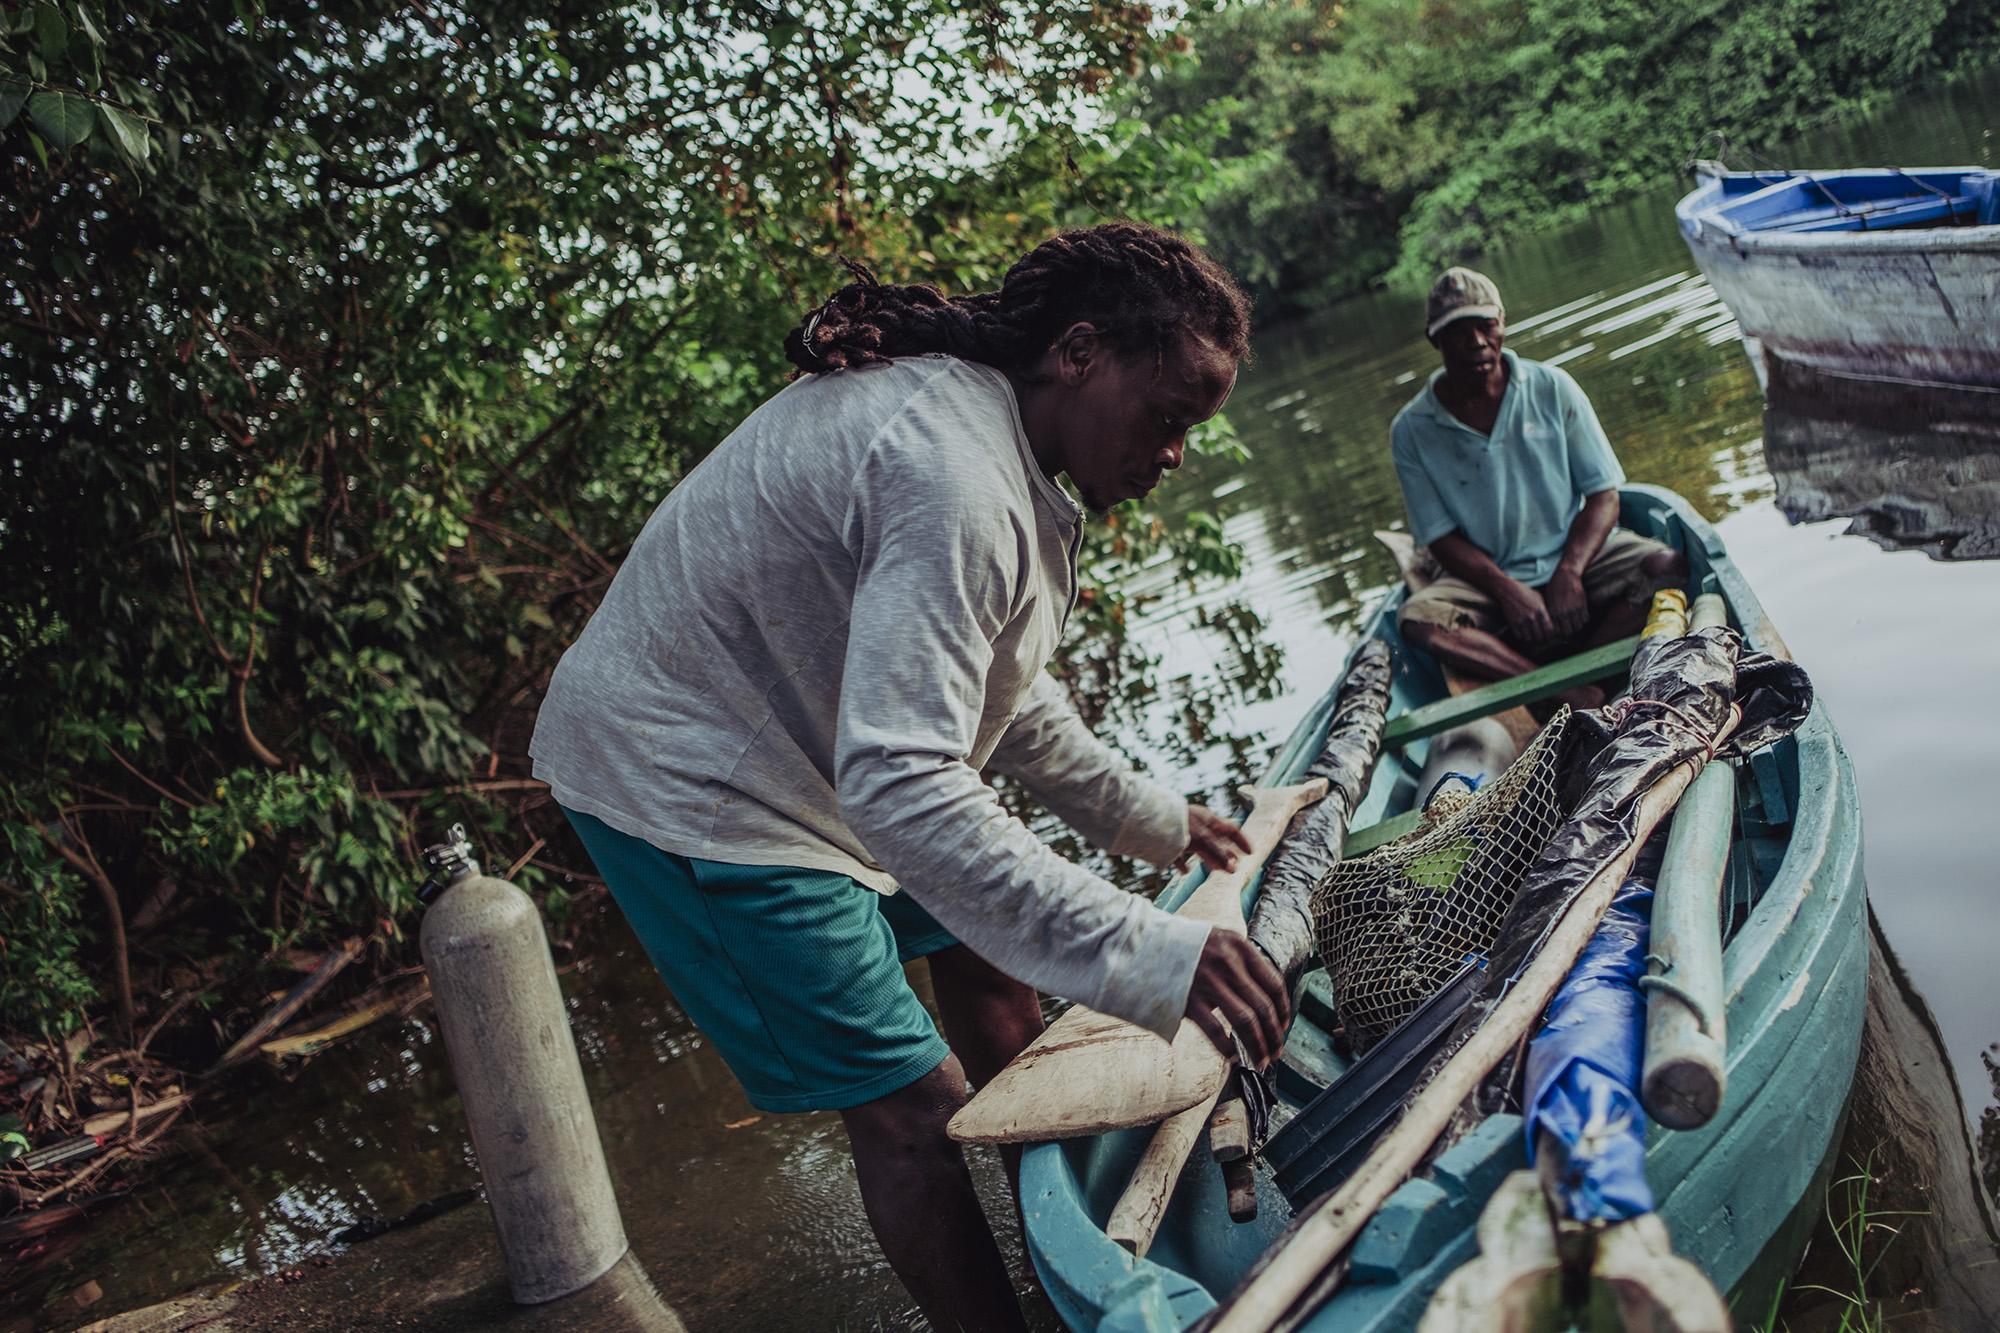 Lala prepares a dugout canoe for a fishing excursion. Pepito, the skipper, waits for departure, still shaking off the effects of last night’s drinking. Photo: Carlos Barrera/El Faro